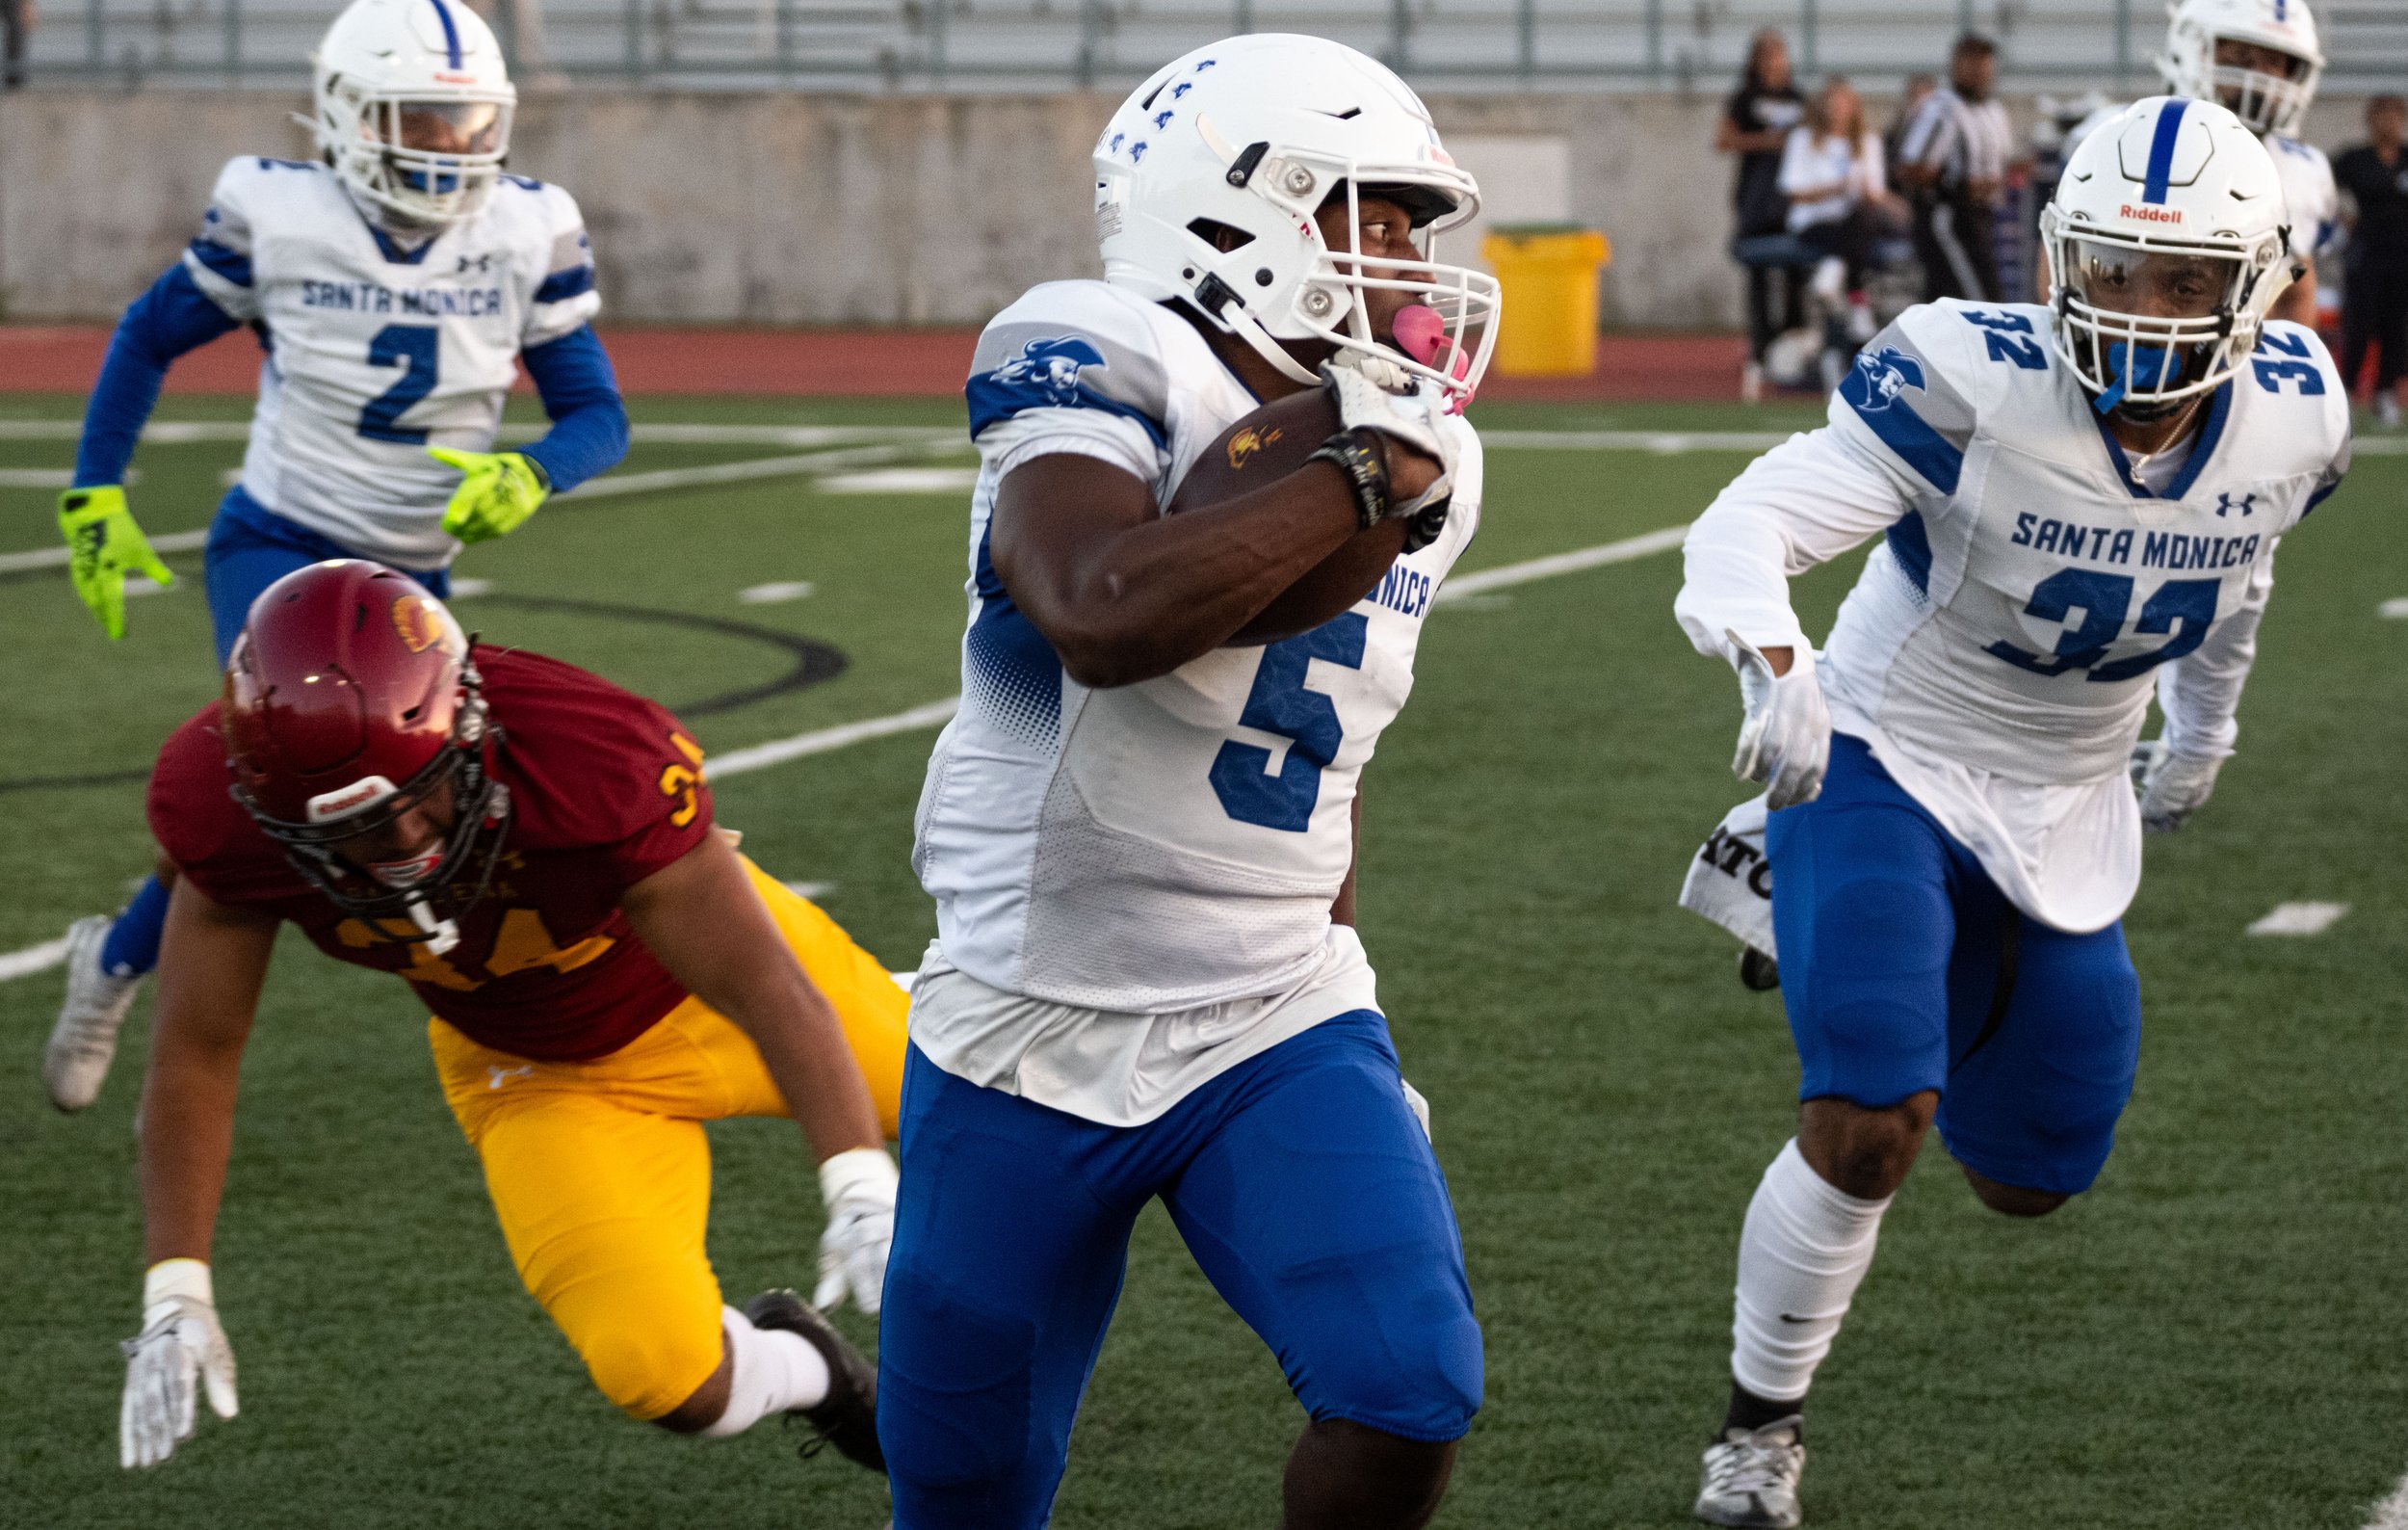  Santa Monica College Corsair wide reciever Myles Parker(5) getting passed Pasadena City College(PCC) Lancer running back Micah Mendoza(34) at the start of the game at Robinson Stadium in PCC campus on Saturday, Oct. 14 Walnut, Calif. (Danilo Perez |